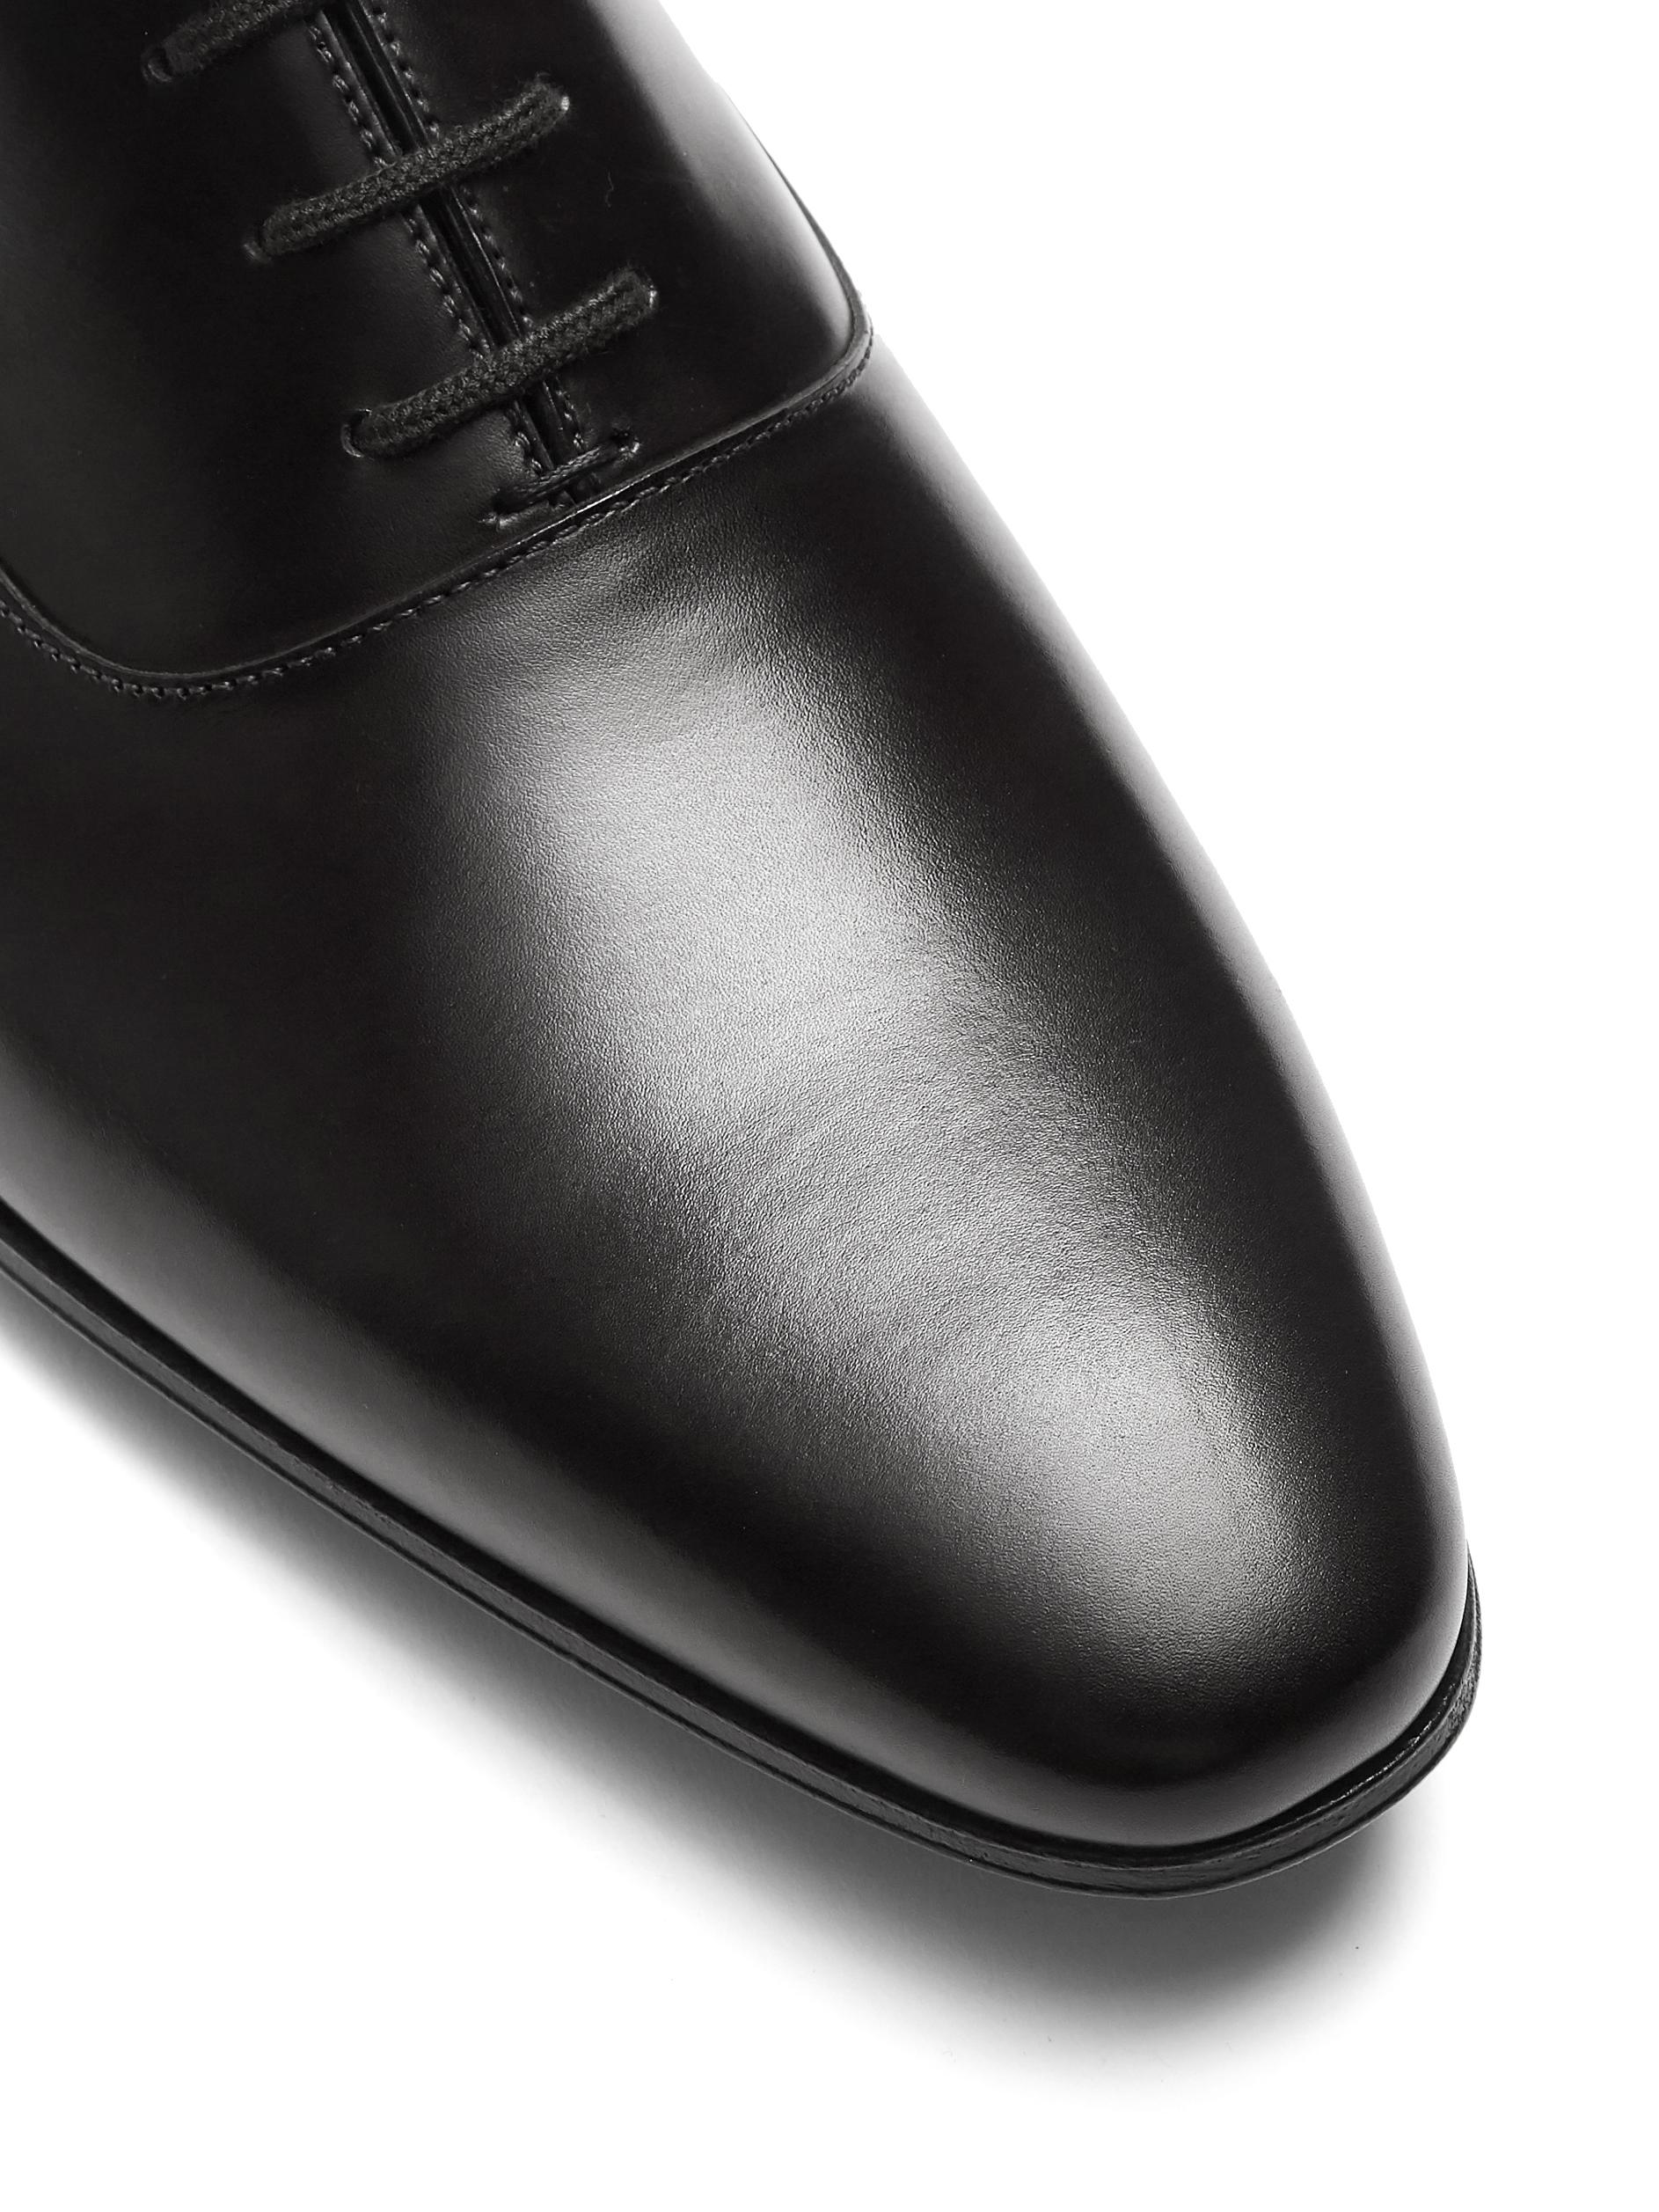 Paul Smith Fleming Leather Oxford Shoes in Black for Men | Lyst UK